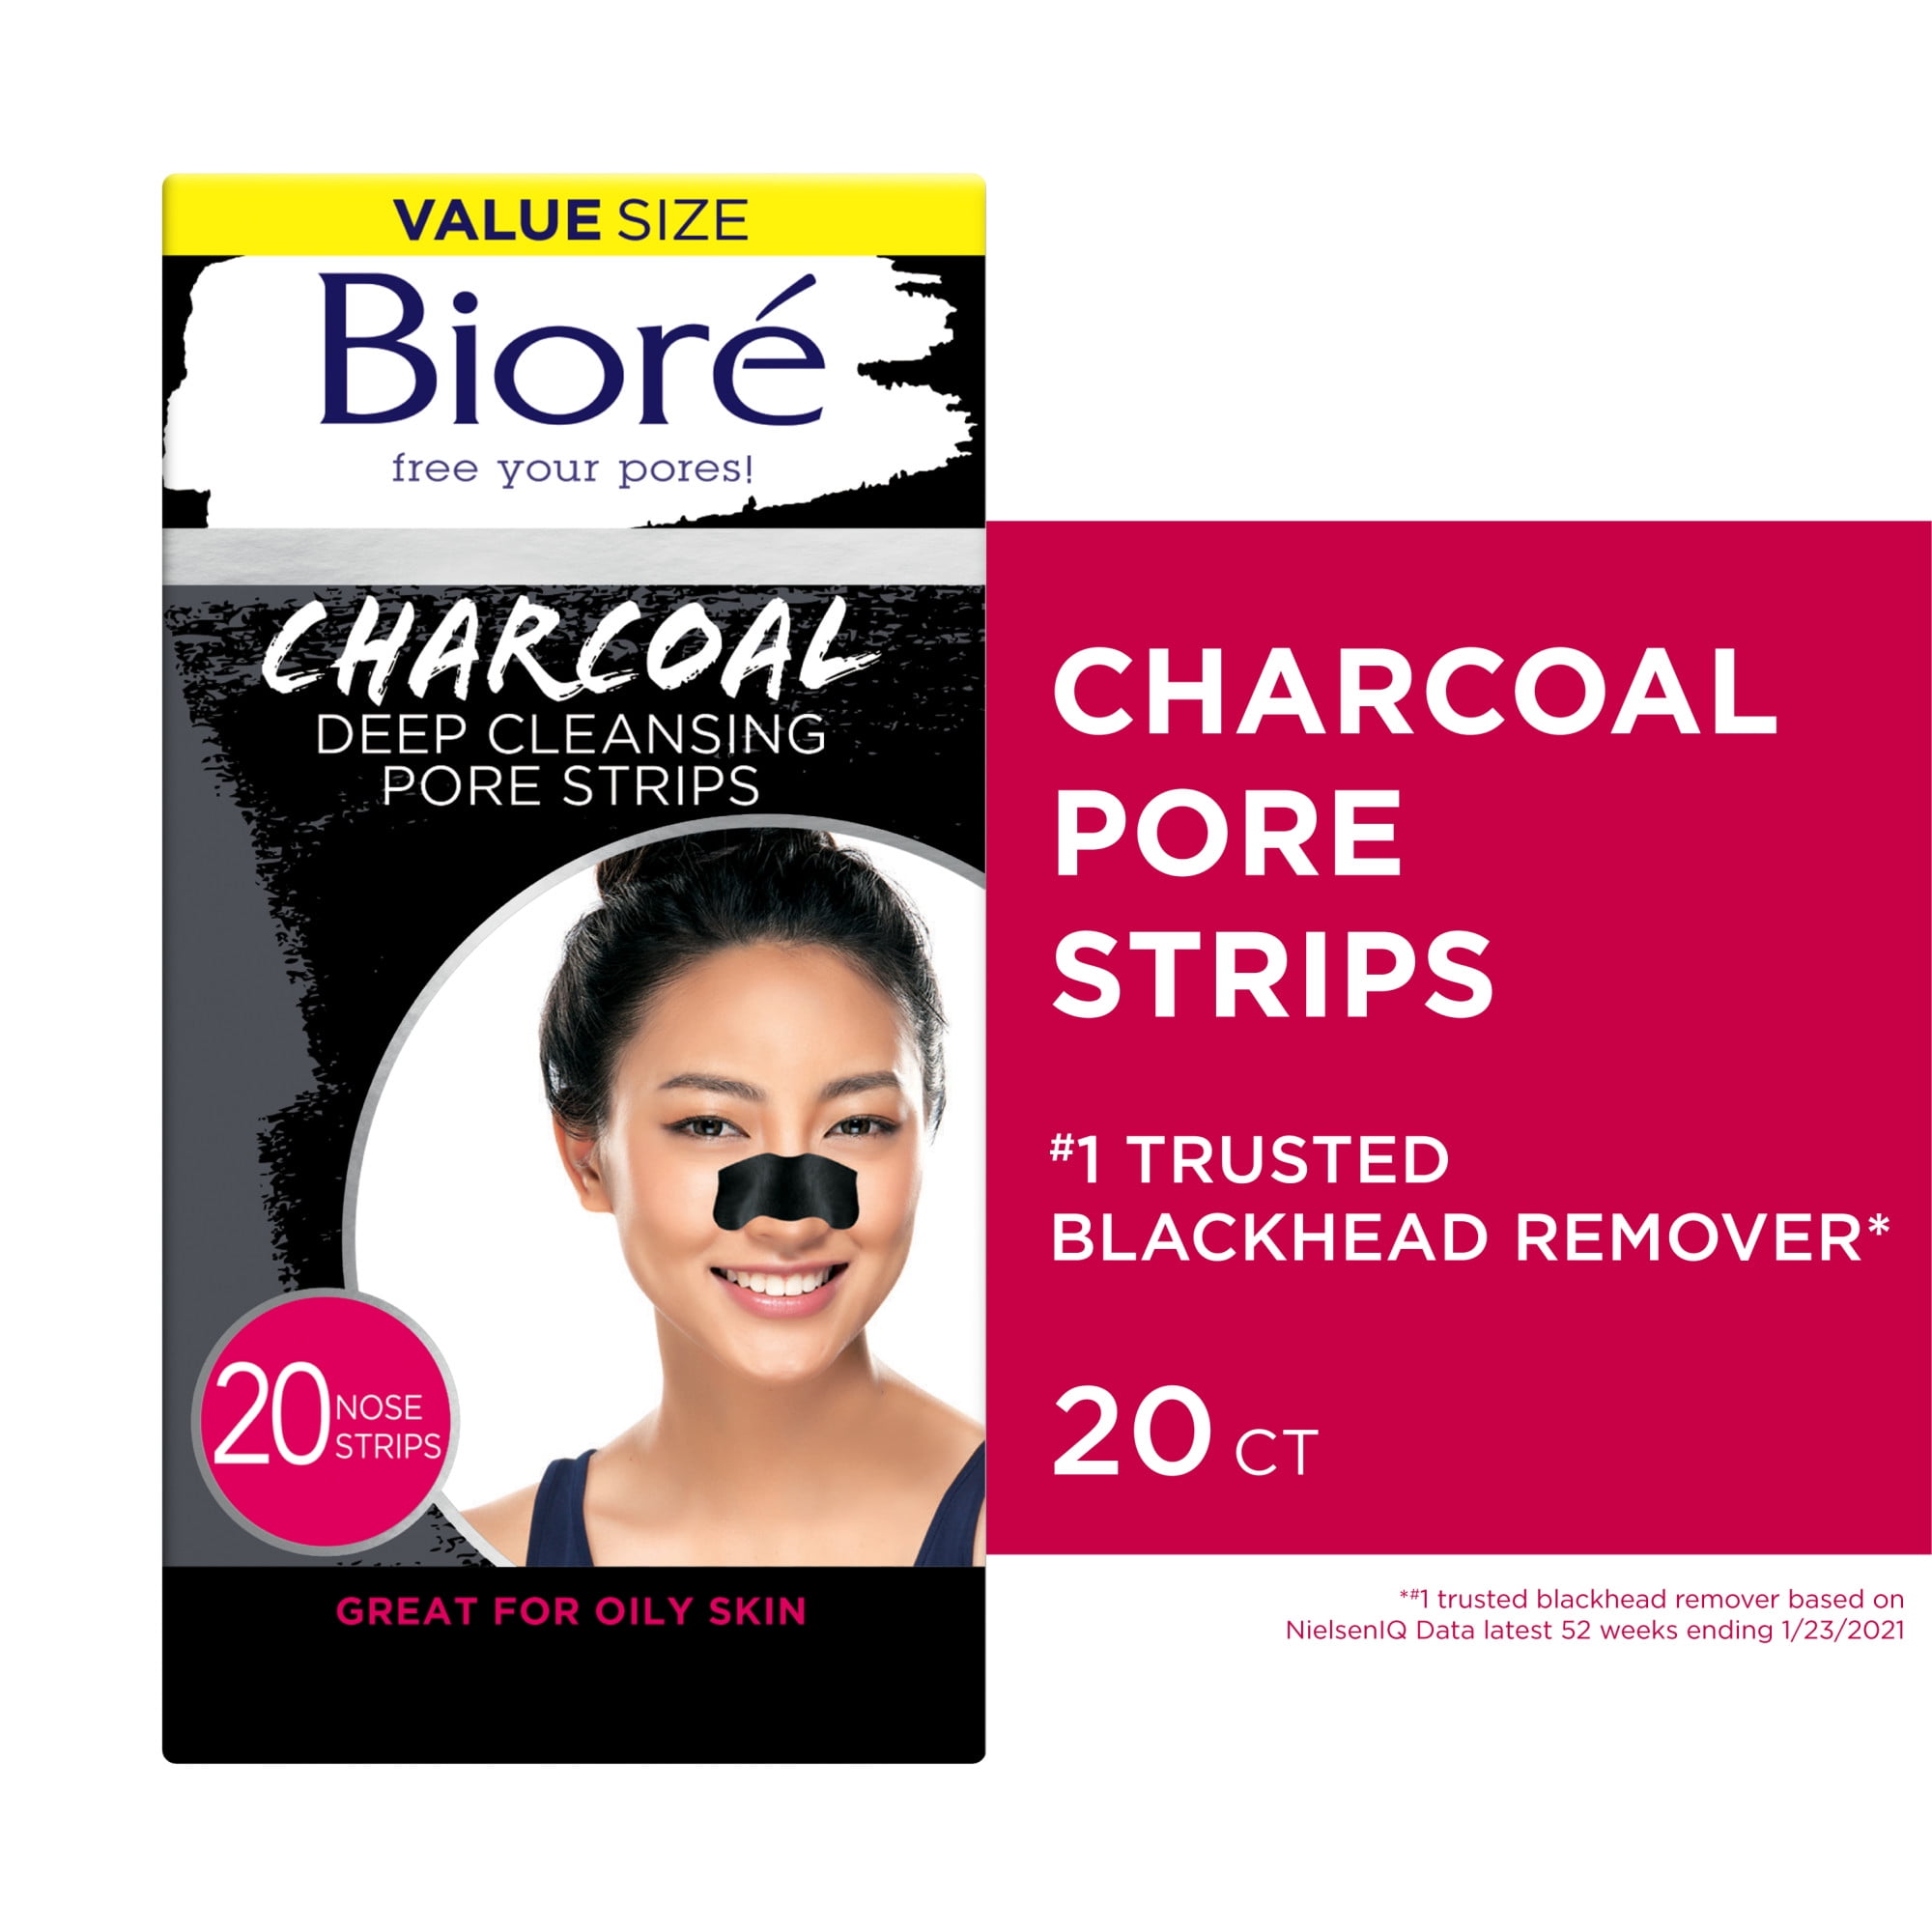 Biore Skincare Charcoal Deep Cleansing Pore Strips, 20 Ct